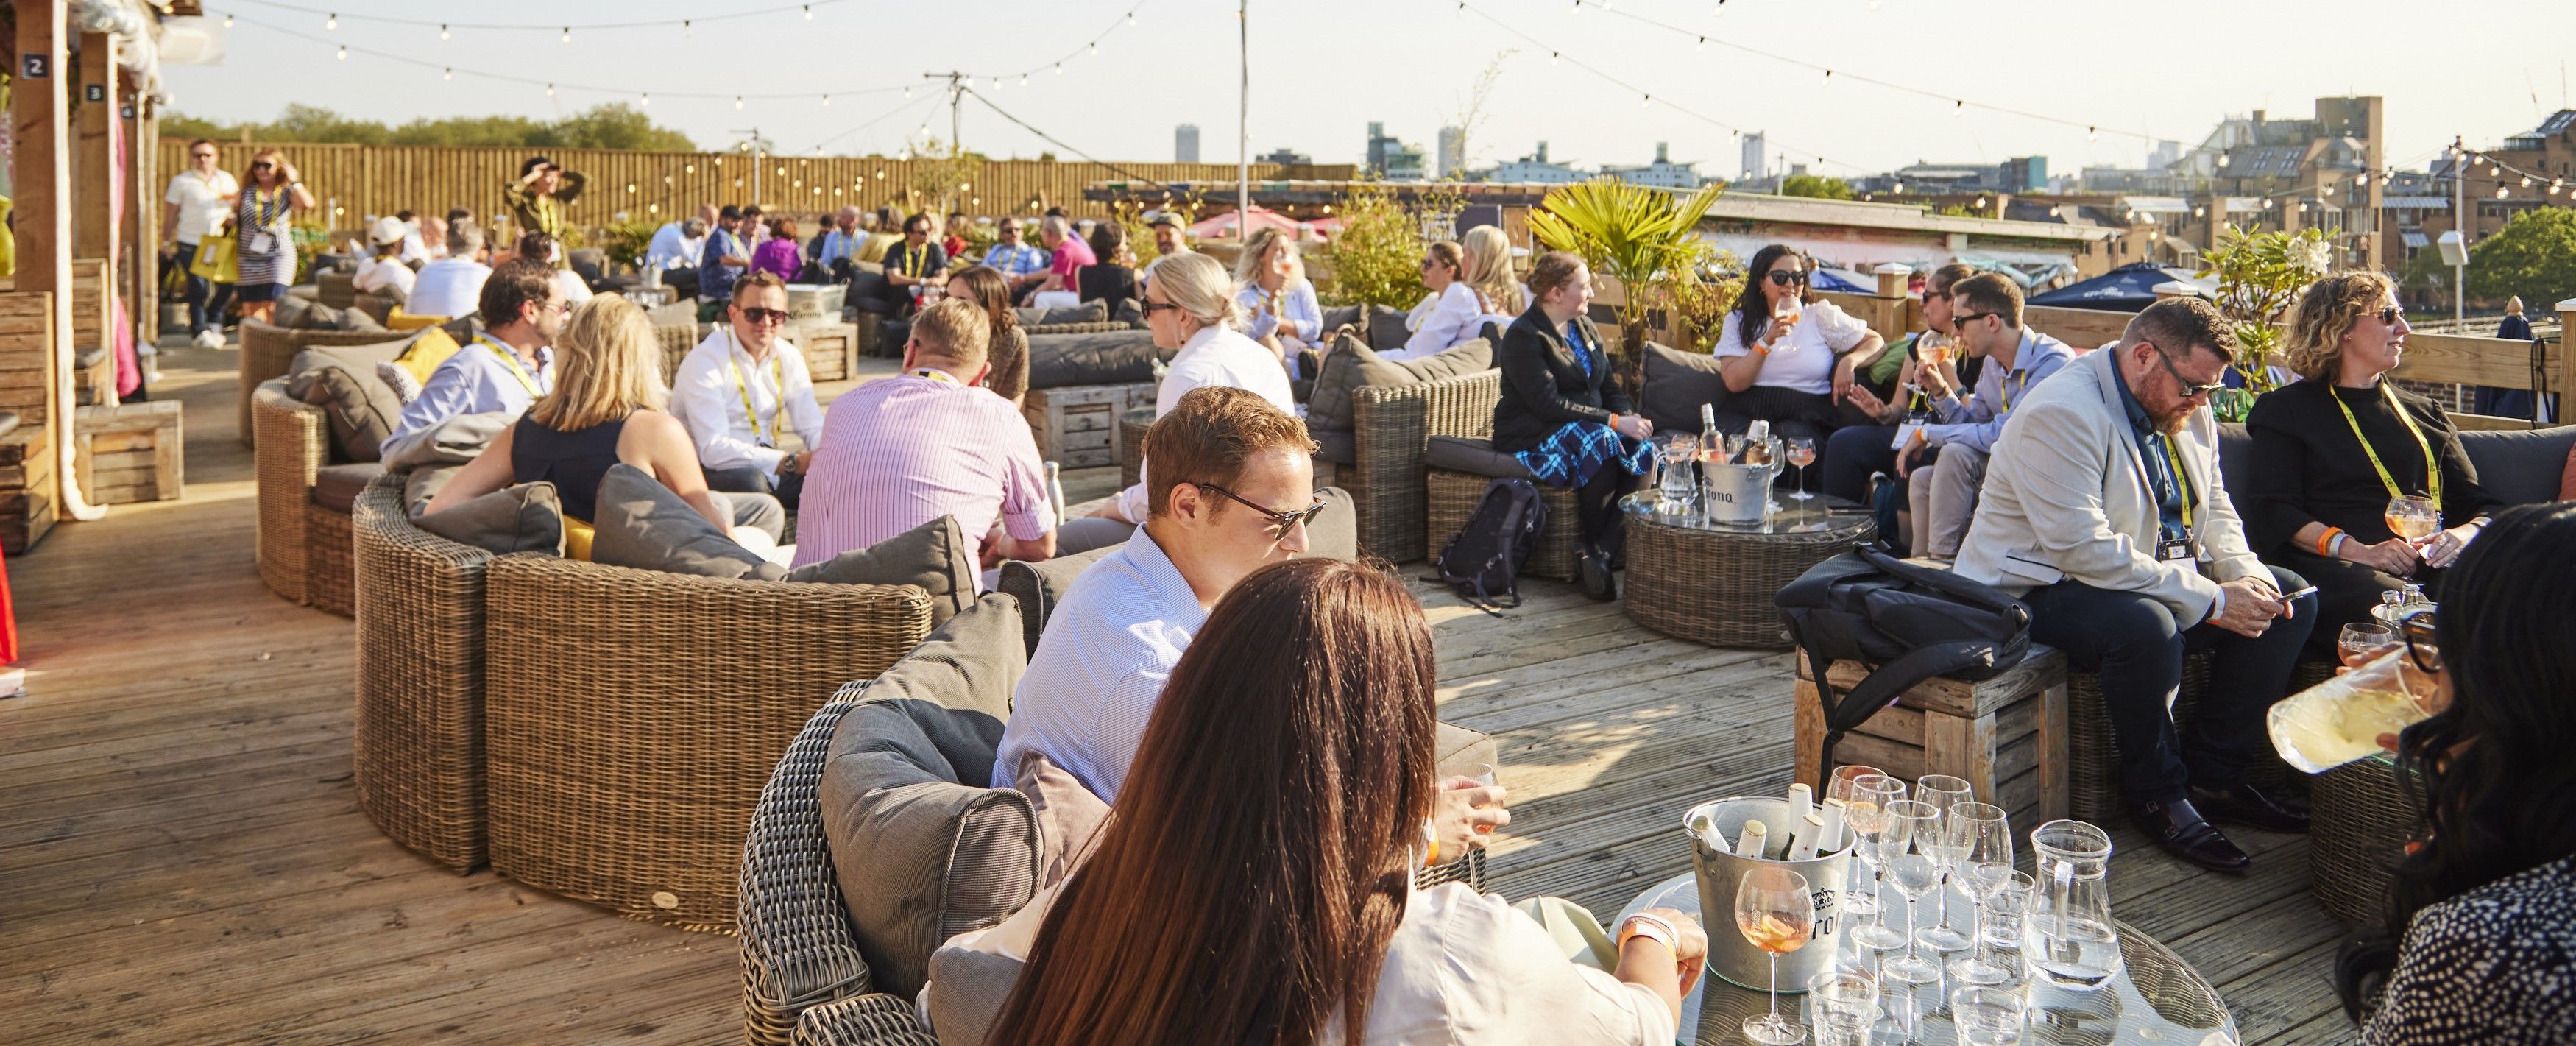 The AI Summit London - Rooftop VIP party